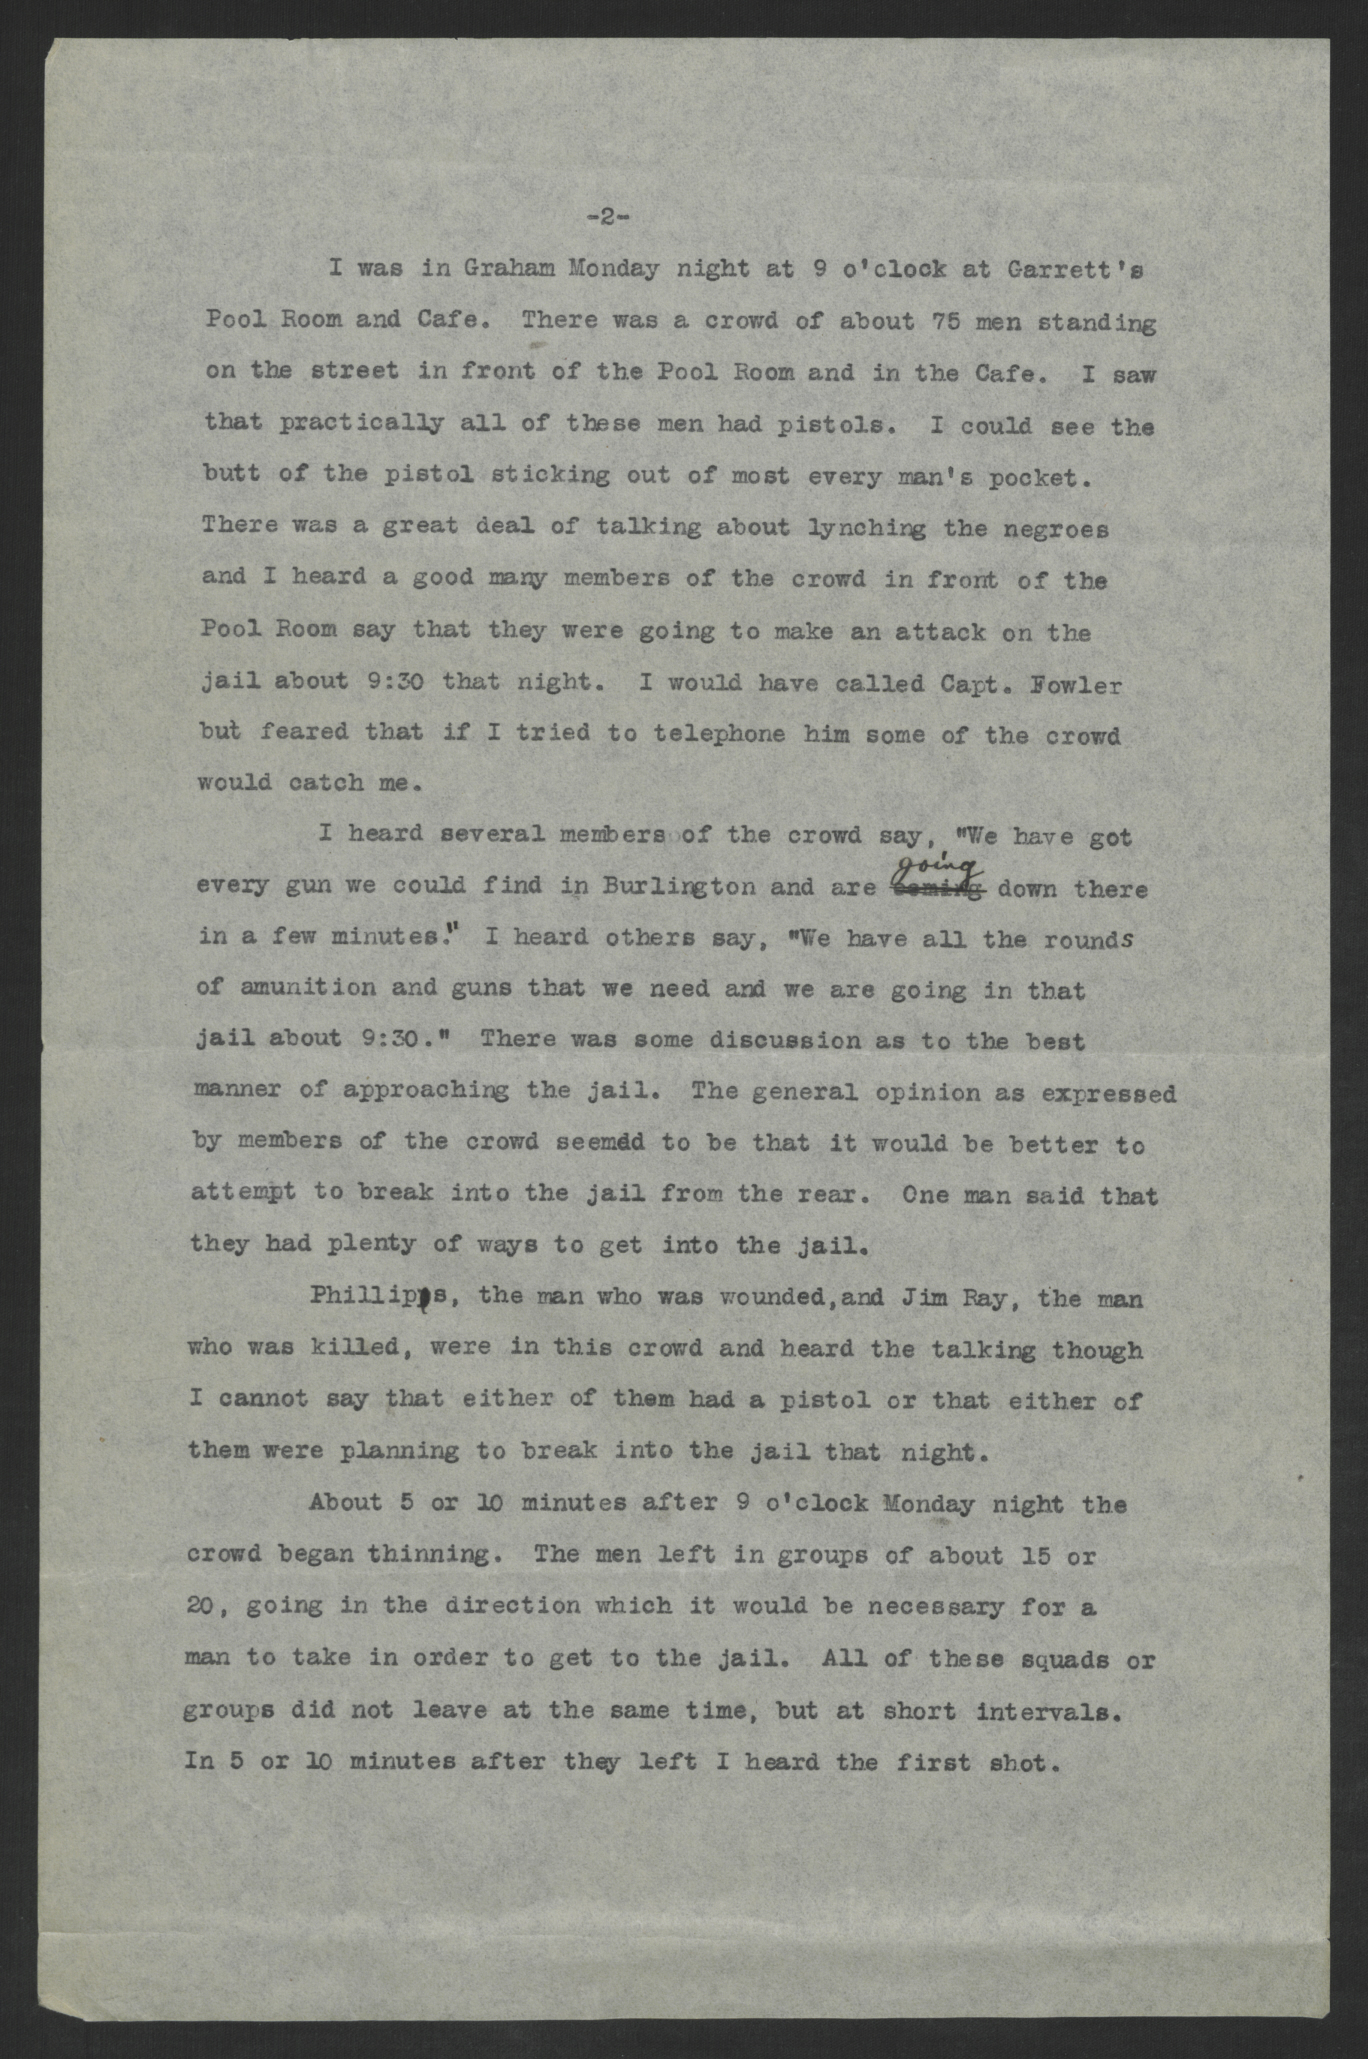 Testimony of Private John Thompson, August 2, 1920, page 2